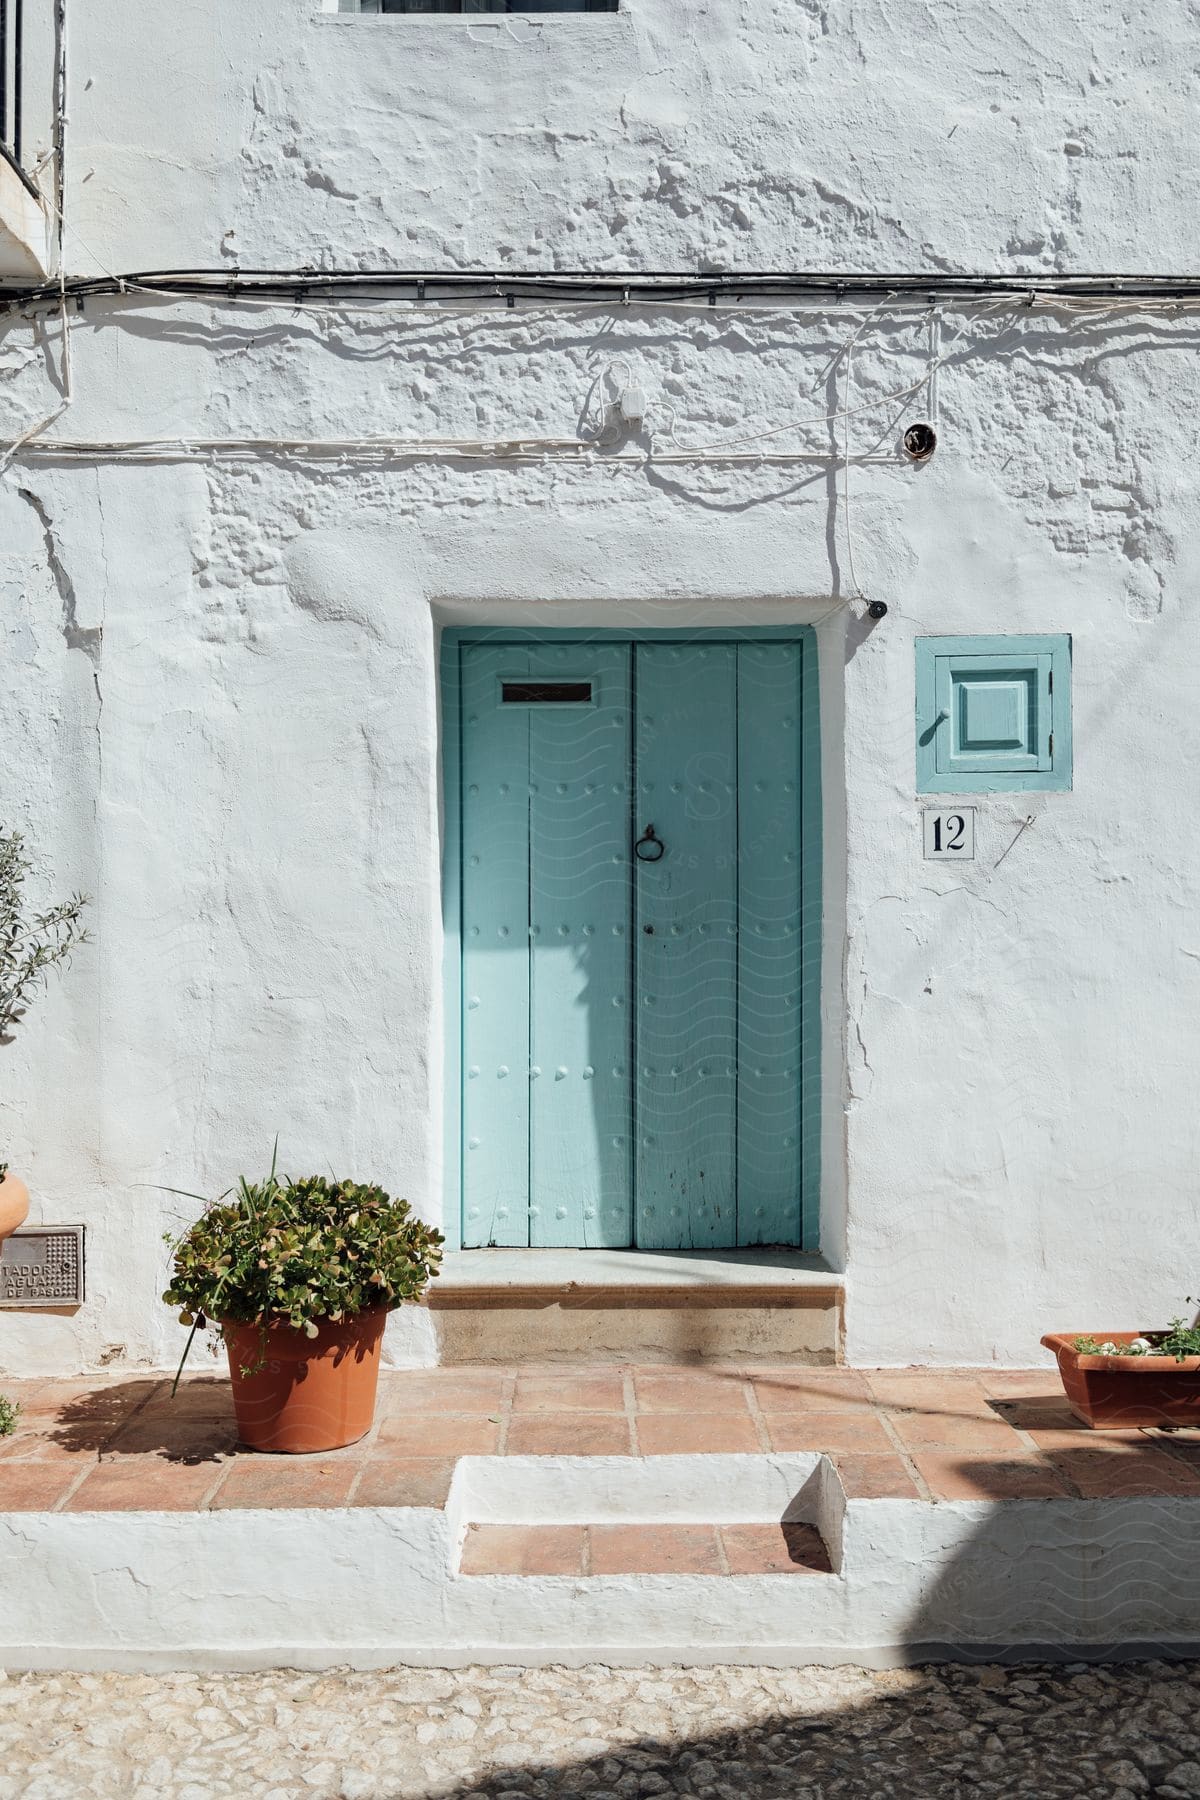 A blue door in a whitewashed wall.